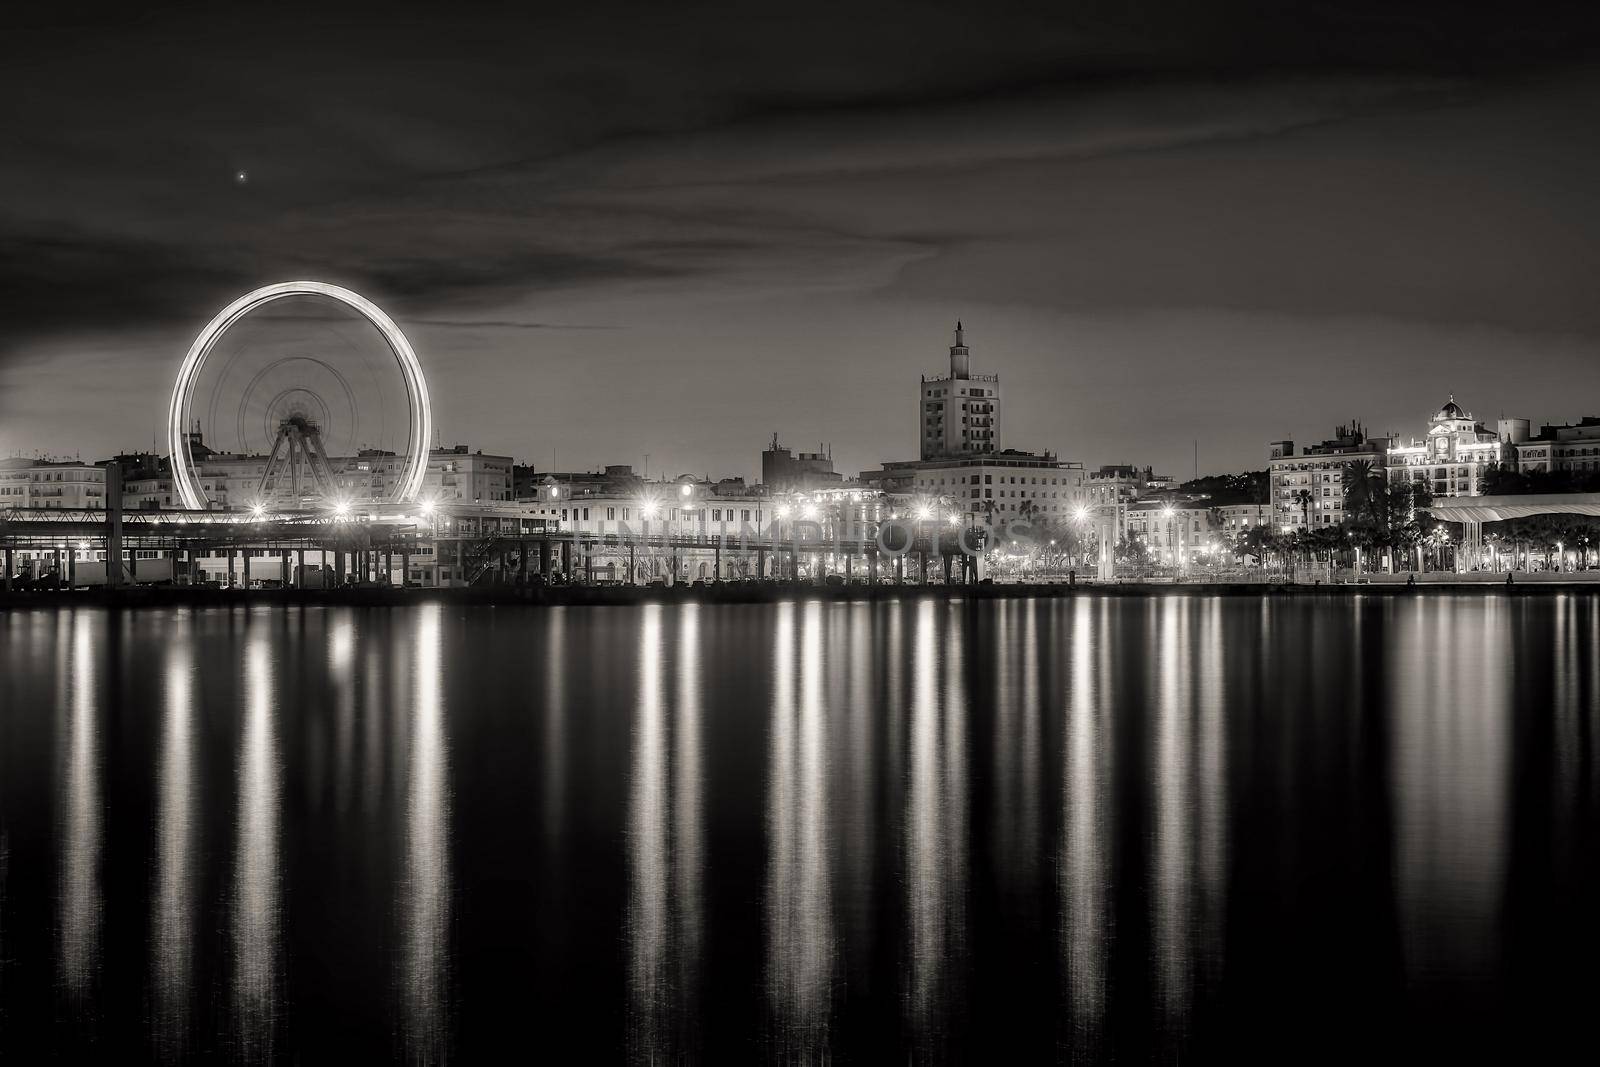 View of Malaga city and Ferris wheel from harbour, Malaga, Spain by Roberto